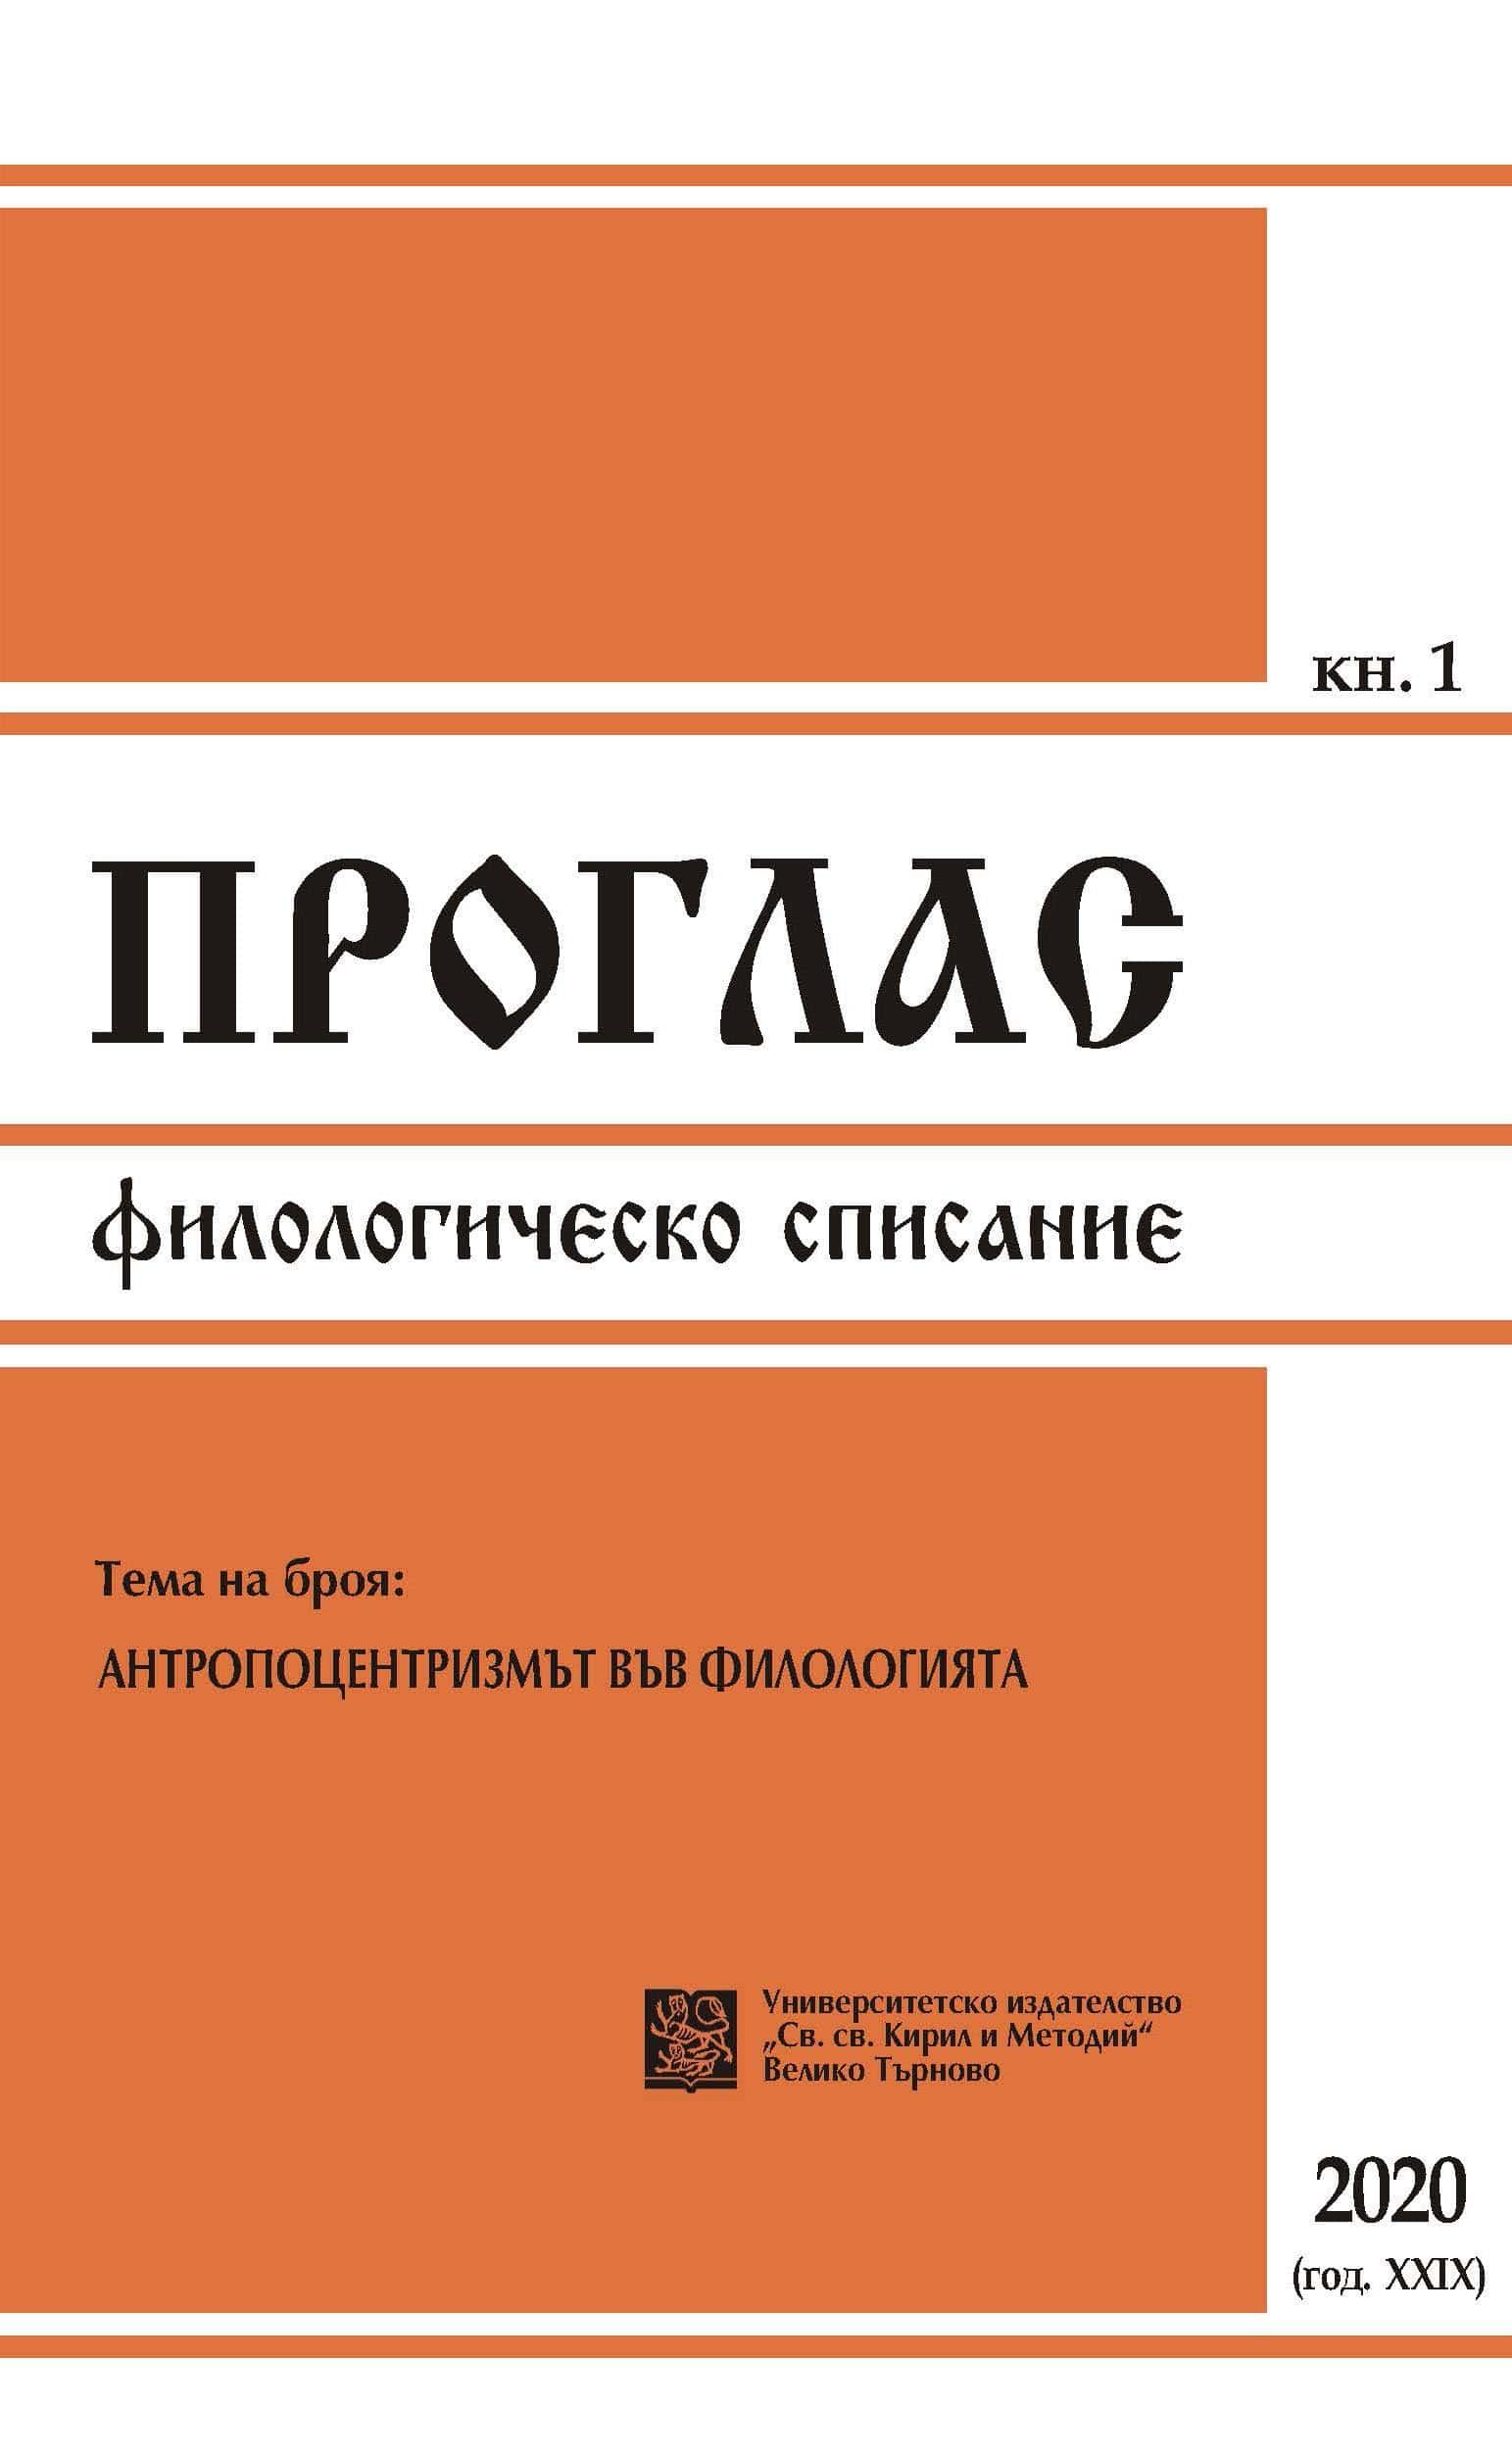 Ethnic interactions in the writings of Bulgarian authors from Bessarabia and Tavria Cover Image